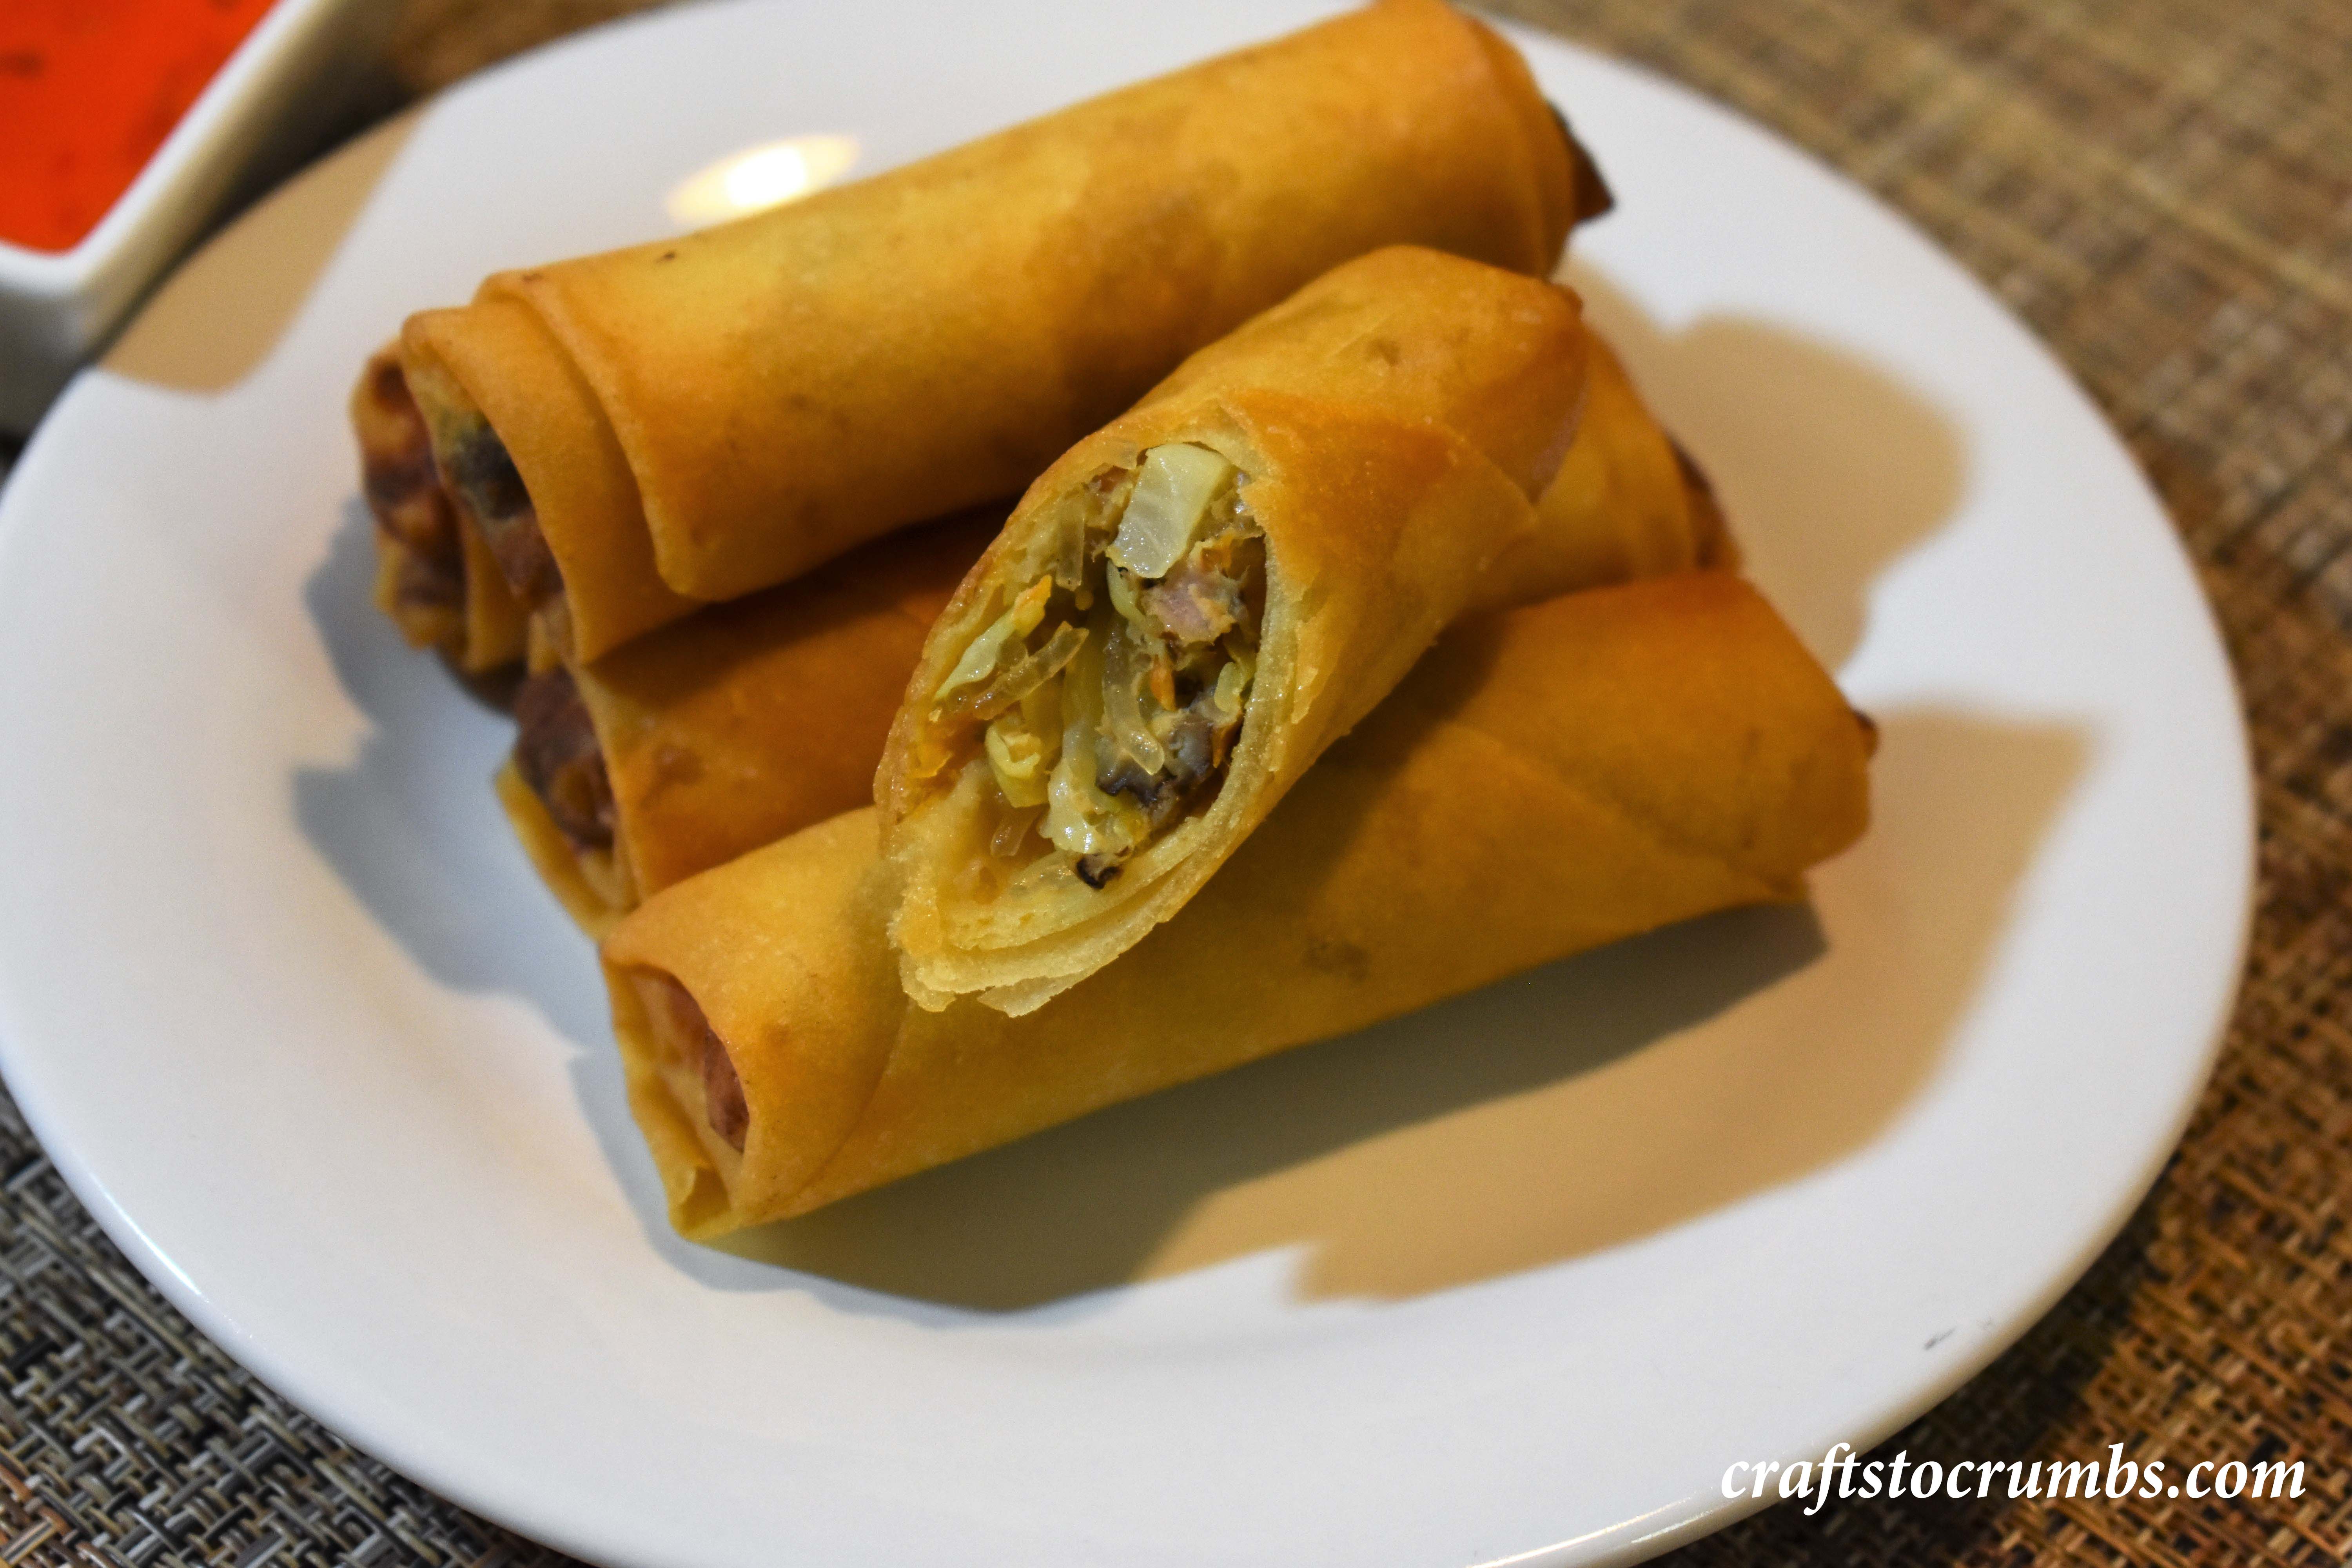 Crafts to Crumbs Spring Rolls